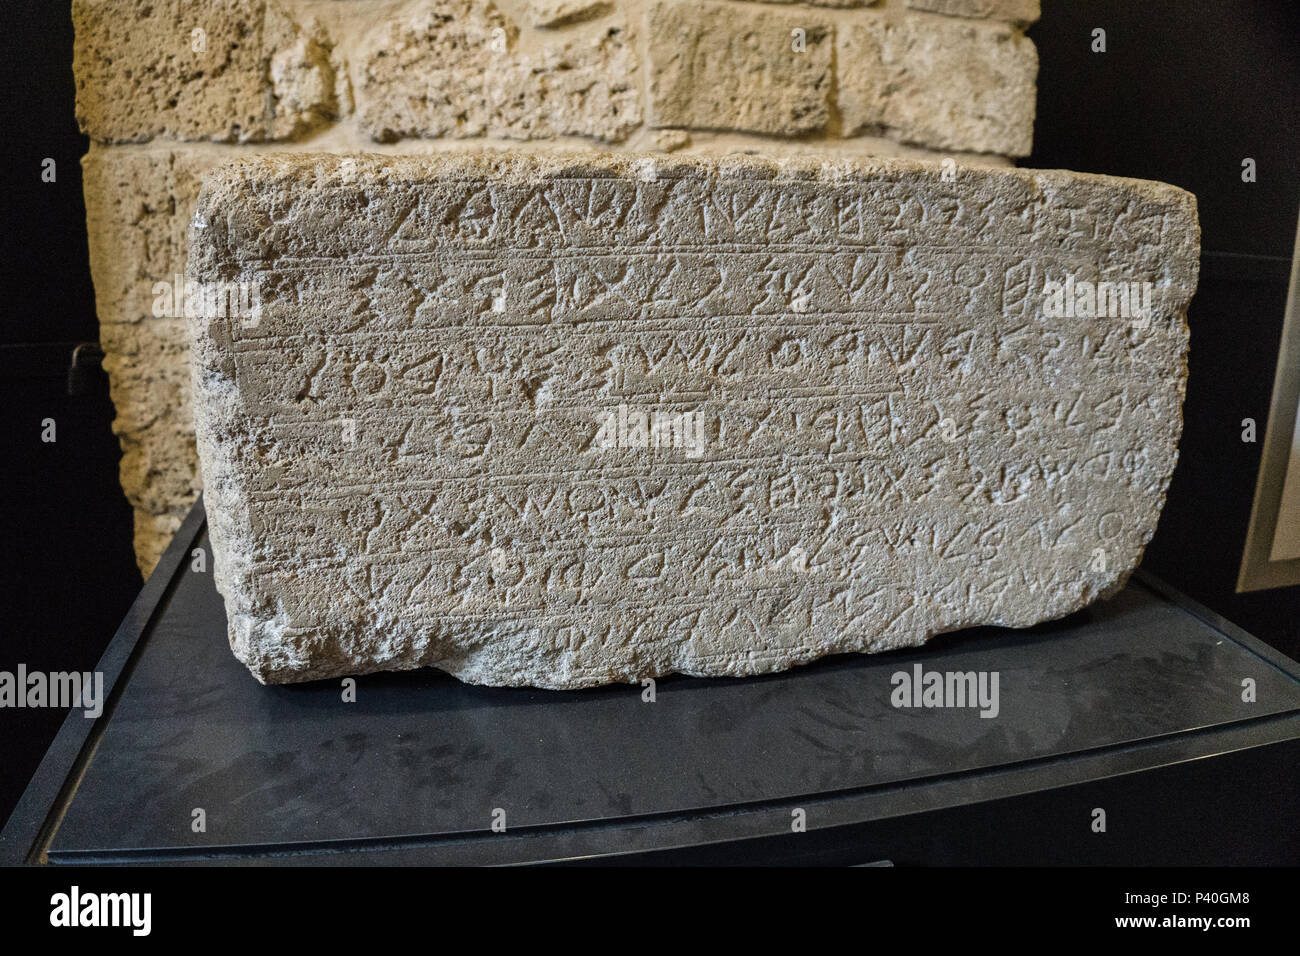 Phoenician Alphabet Stone from Byblos Museum Stock Photo